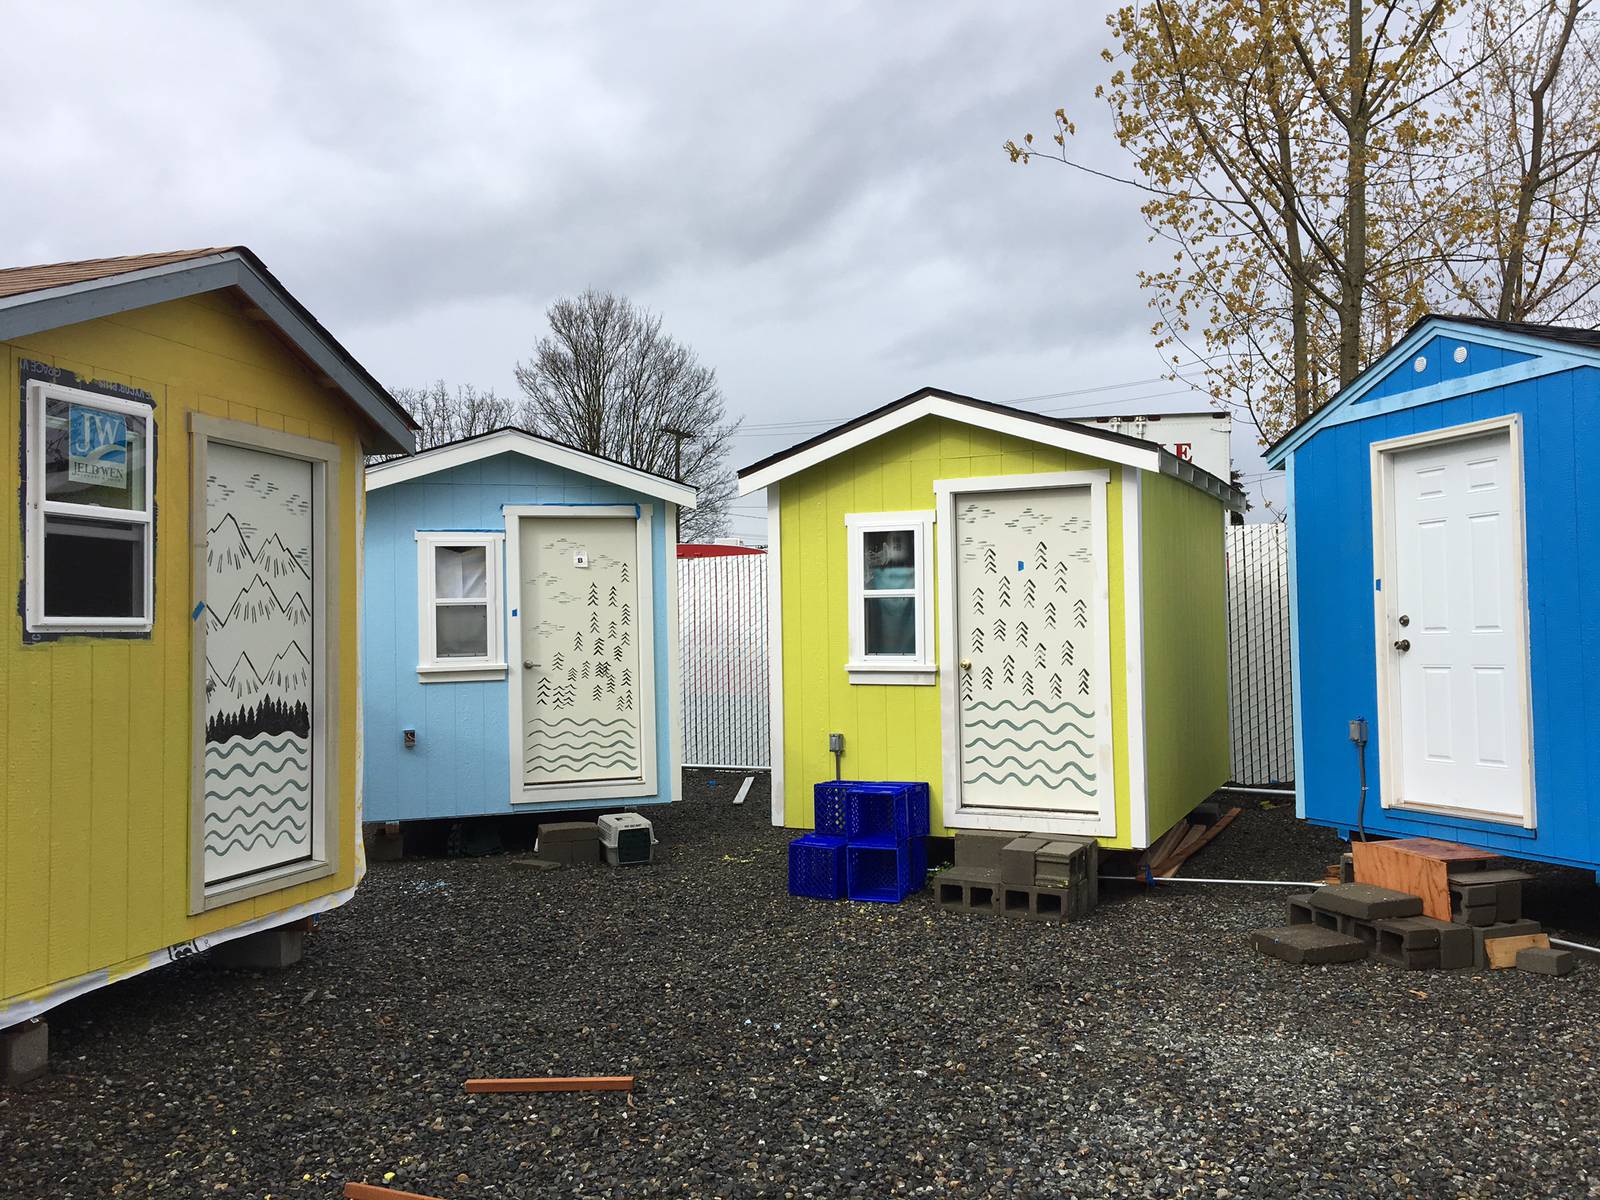 1 000 New Tiny Homes Could Soon Be Built In Seattle At Possible 10m Cost Kiro 7 News Seattle